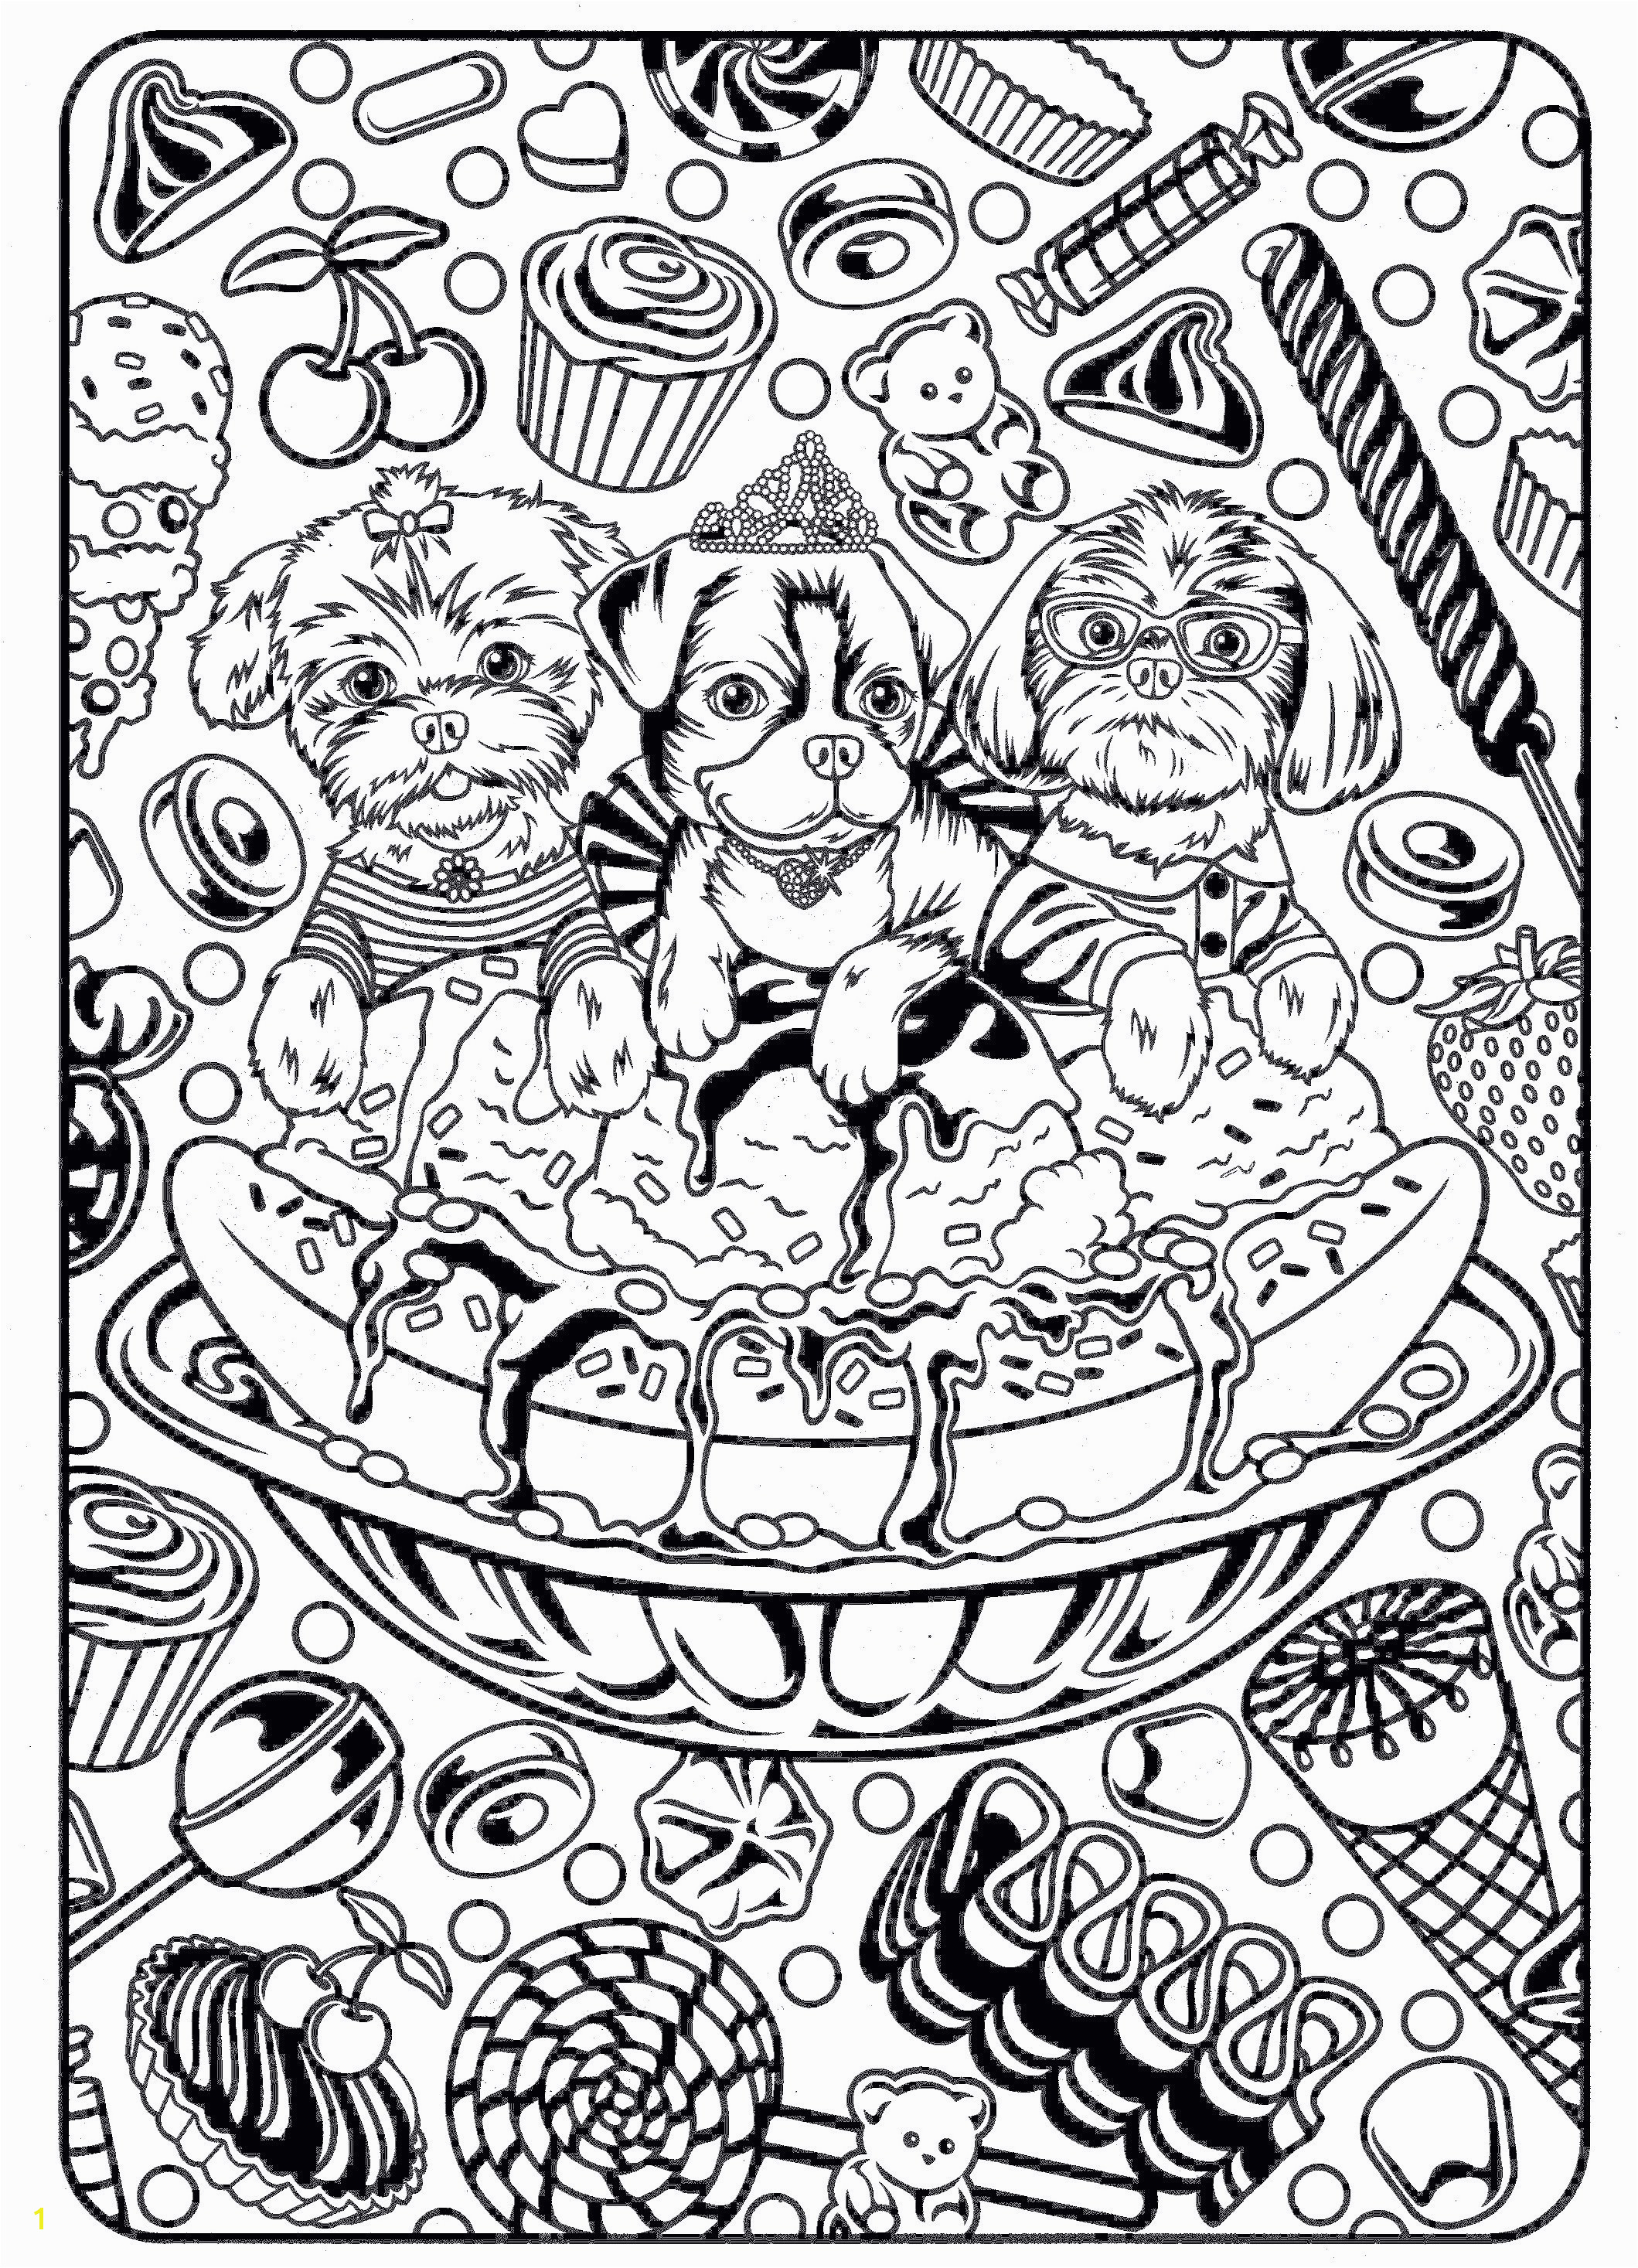 Little Engine that Could Coloring Pages Wedding Coloring Sheets New Stock 40free Wedding Coloring Pages